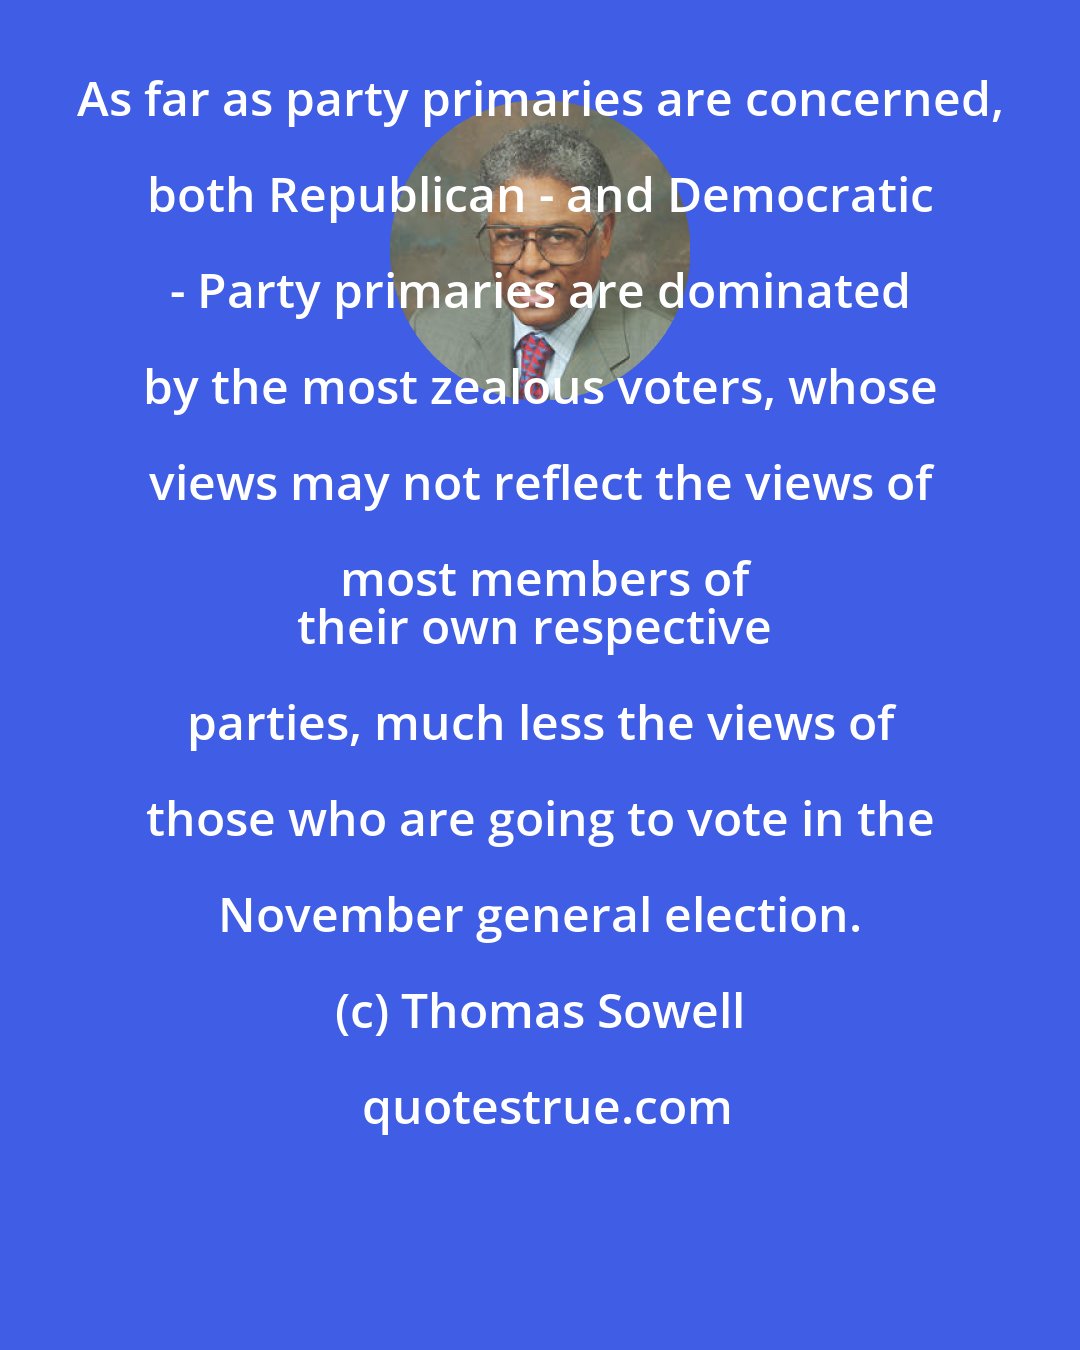 Thomas Sowell: As far as party primaries are concerned, both Republican - and Democratic - Party primaries are dominated by the most zealous voters, whose views may not reflect the views of most members of
their own respective parties, much less the views of those who are going to vote in the November general election.